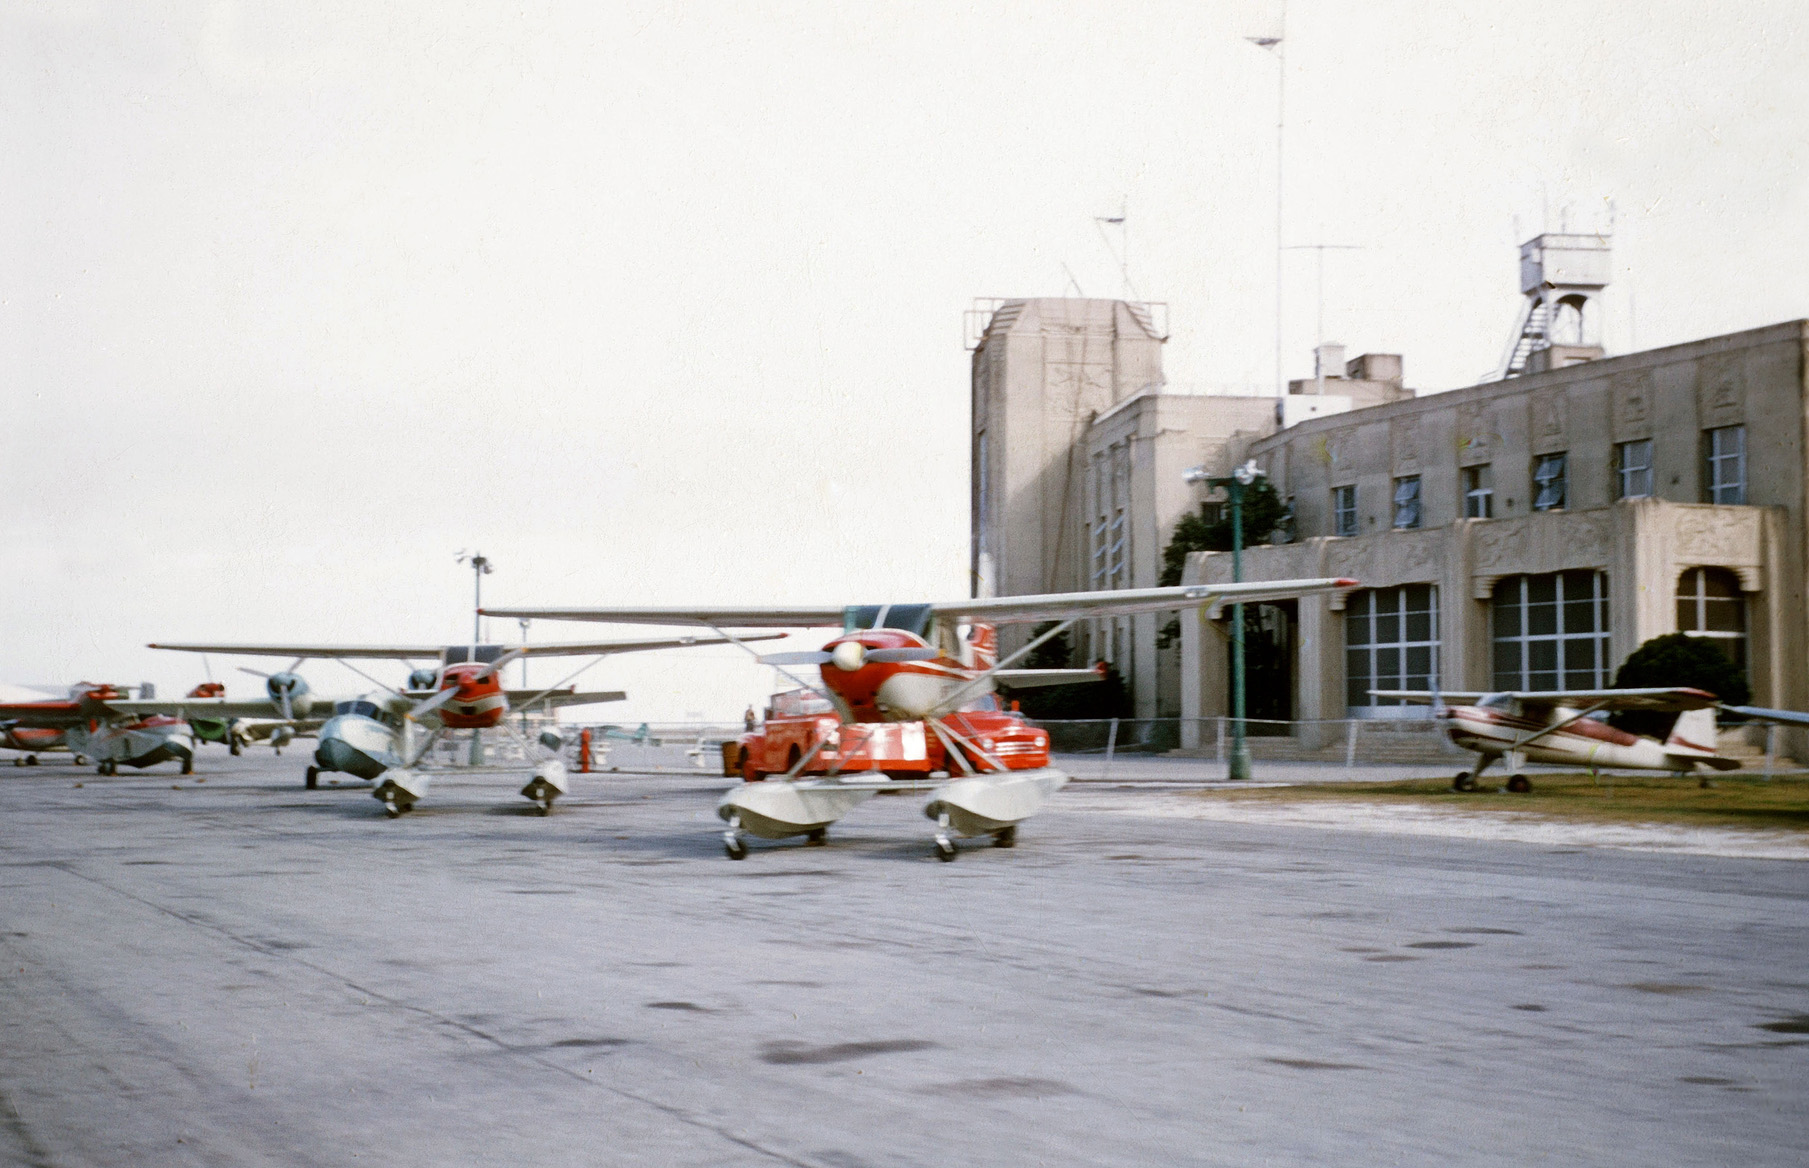 My dad had a new Piper Super Cub fitted with pontoons and this may be where he had it done. This slide would have probably been taken in mid-1957.

Can anyone identify this place? I'd love to know where it is; that's a nice-looking building. I have a couple of other photos taken here but they show planes and probably wouldn't help identify the locale.

I apologize for the terrible focus; I was in the first grade when I took this and was nervous using my dad's camera (Kodak Signet 80, for you camera buffs!). View full size.